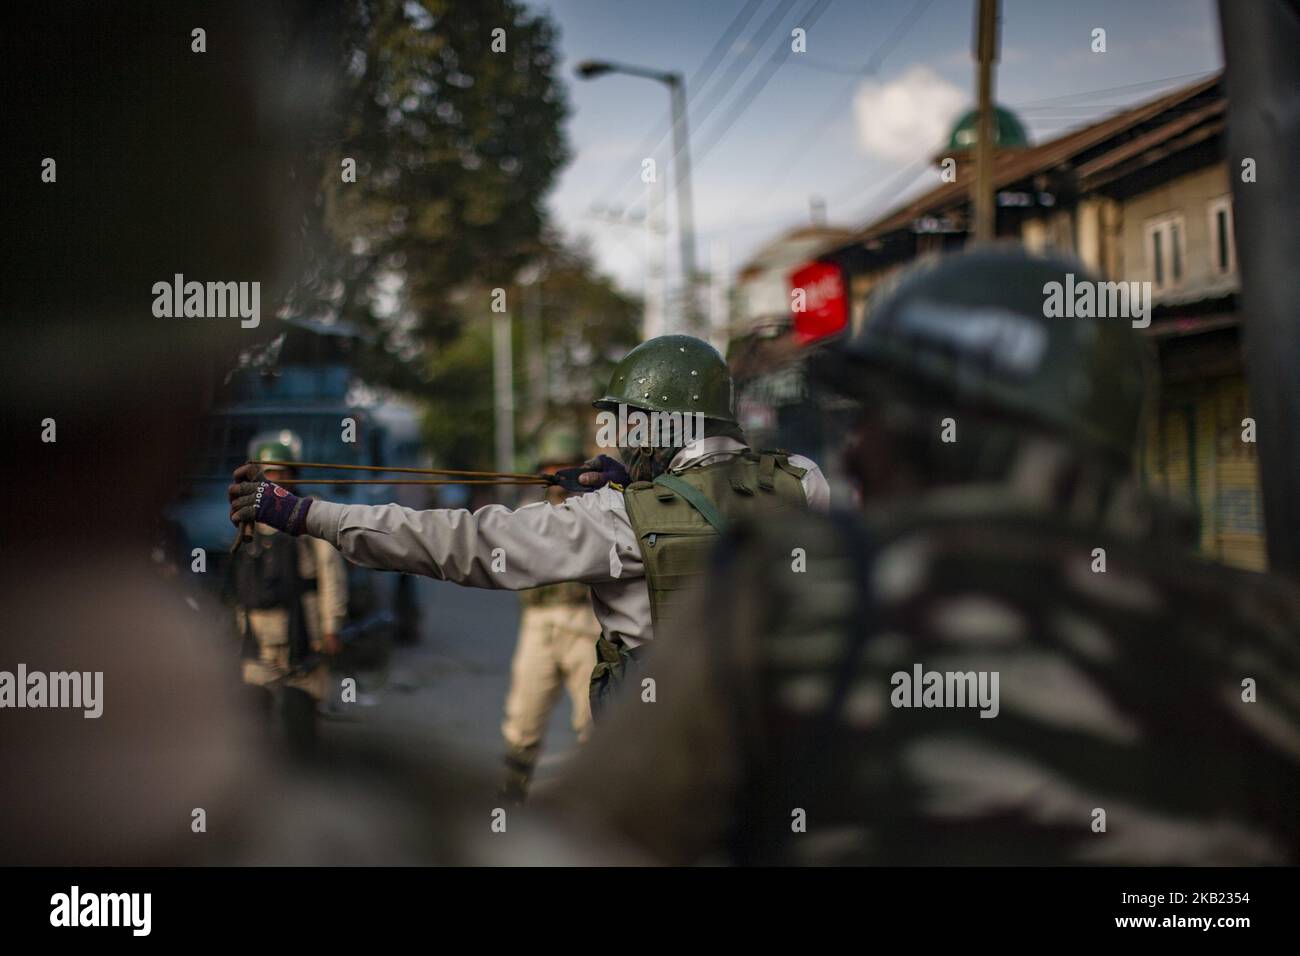 An Indian paramilitary trooper shoots stones with his catapult at Kashmiri Muslim protesters during a protest against the killing of a Kashmiri rebel commander on October 12, 2018 in Srinagar, the summer capital of Indian administered Kashmir, India.Kashmiri youth clashed with Indian government forces who were deployed in strength in different parts of Srinagar on Friday to prevent protests against the killing of a Kashmiri rebel commander in Kupwara district of Indian-administered Kashmir the previous day. Manan Wani, who had quit his doctorate in Geology at an Indian university to join the H Stock Photo